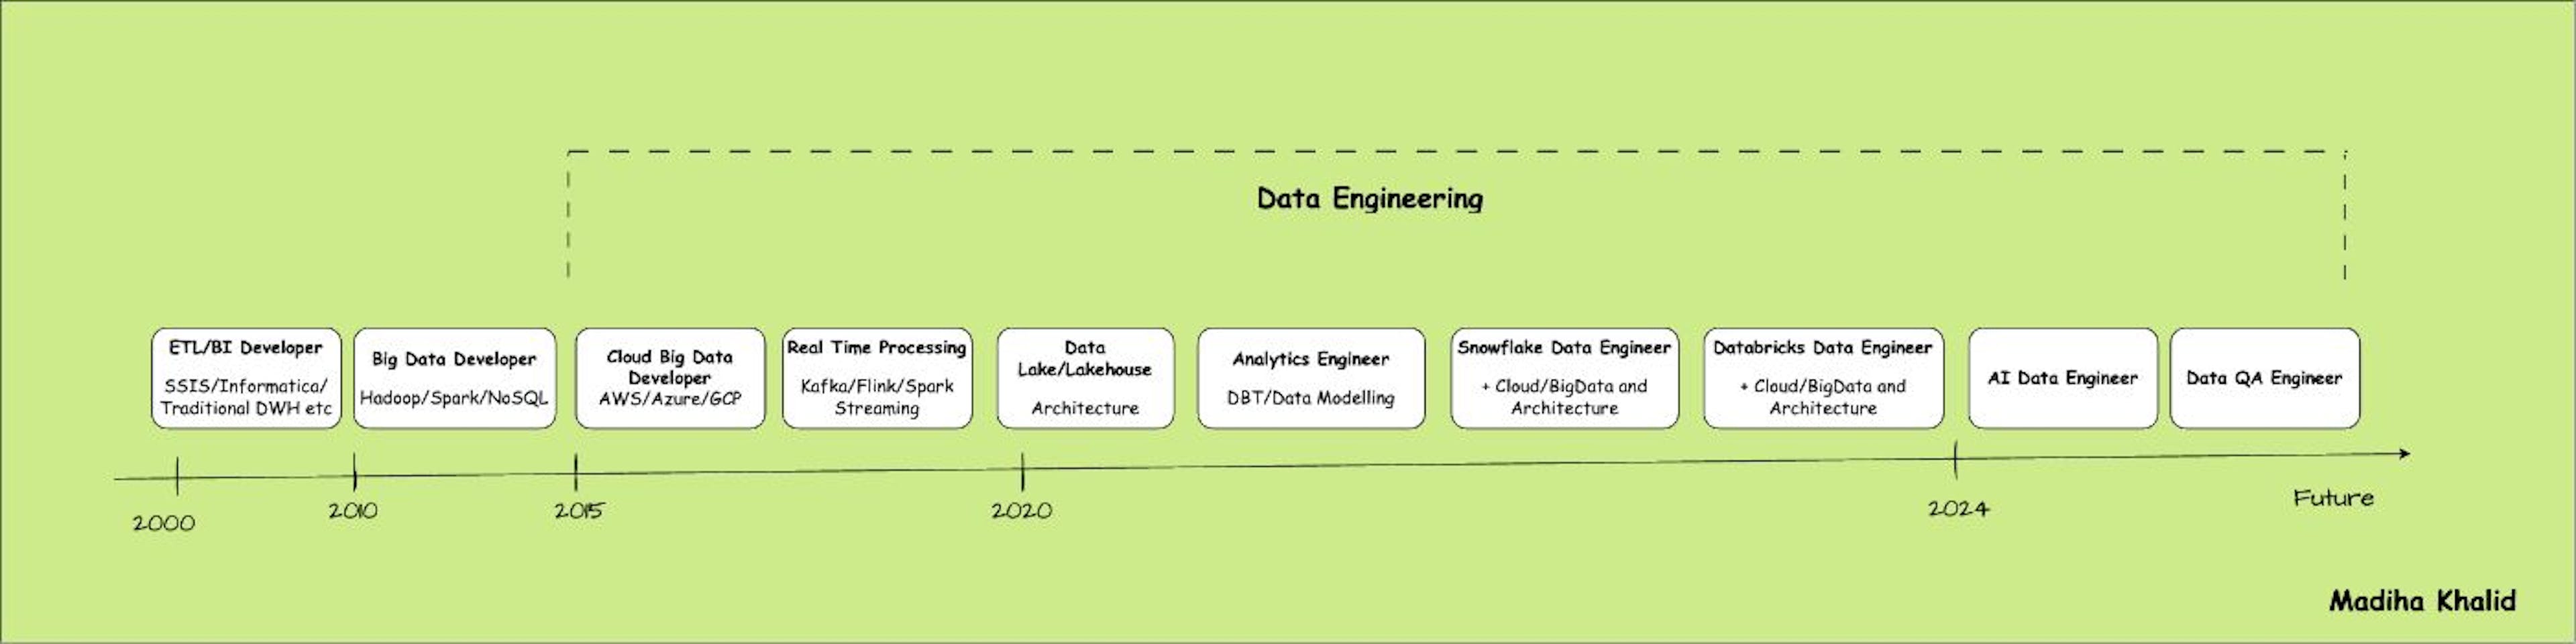 History of Data Engineering Role